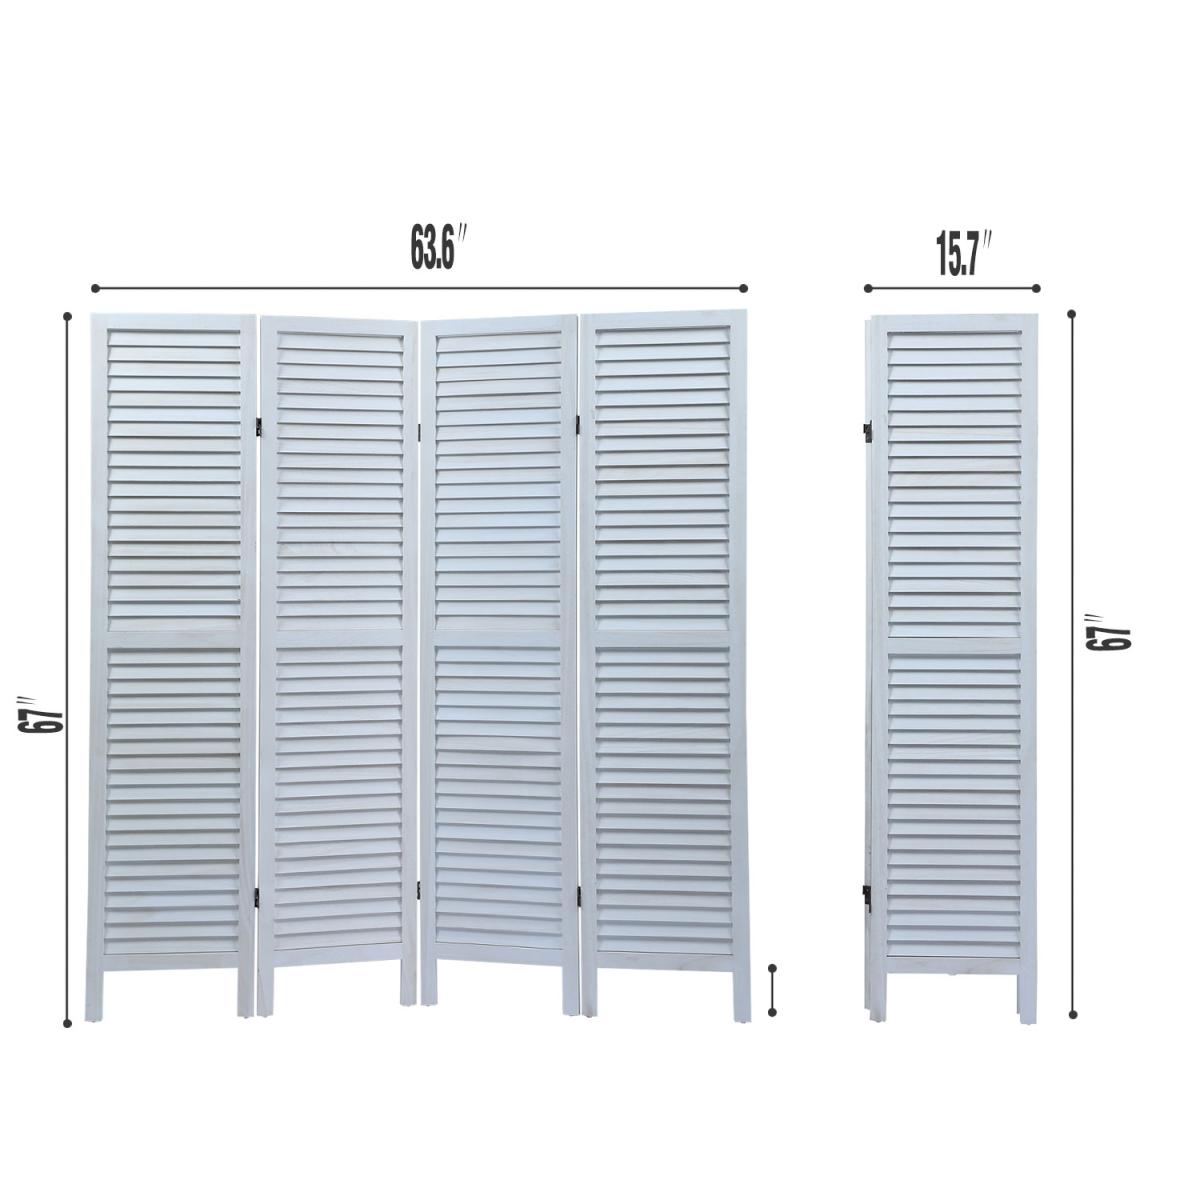 Sycamore wood 4 Panel Screen Folding Louvered Room Divider - Old white